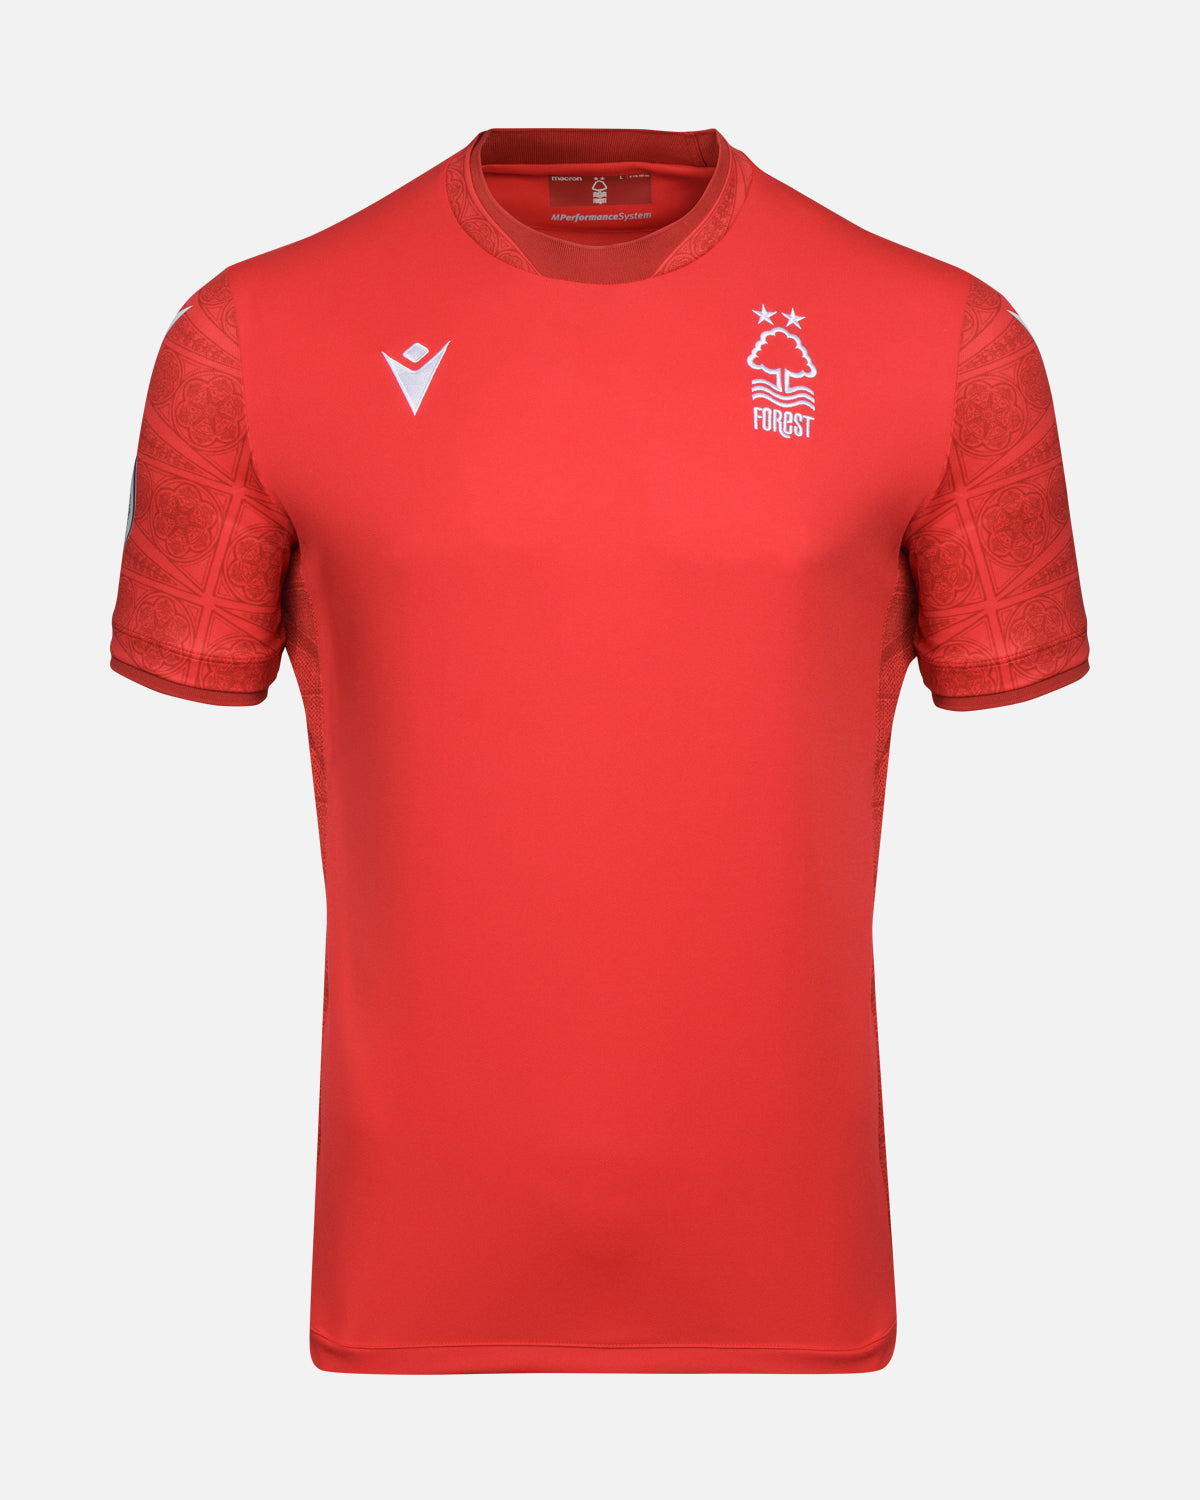 Nottingham Forest 2022-23 Macron Home Kit - Football Shirt Culture - Latest  Football Kit News and More